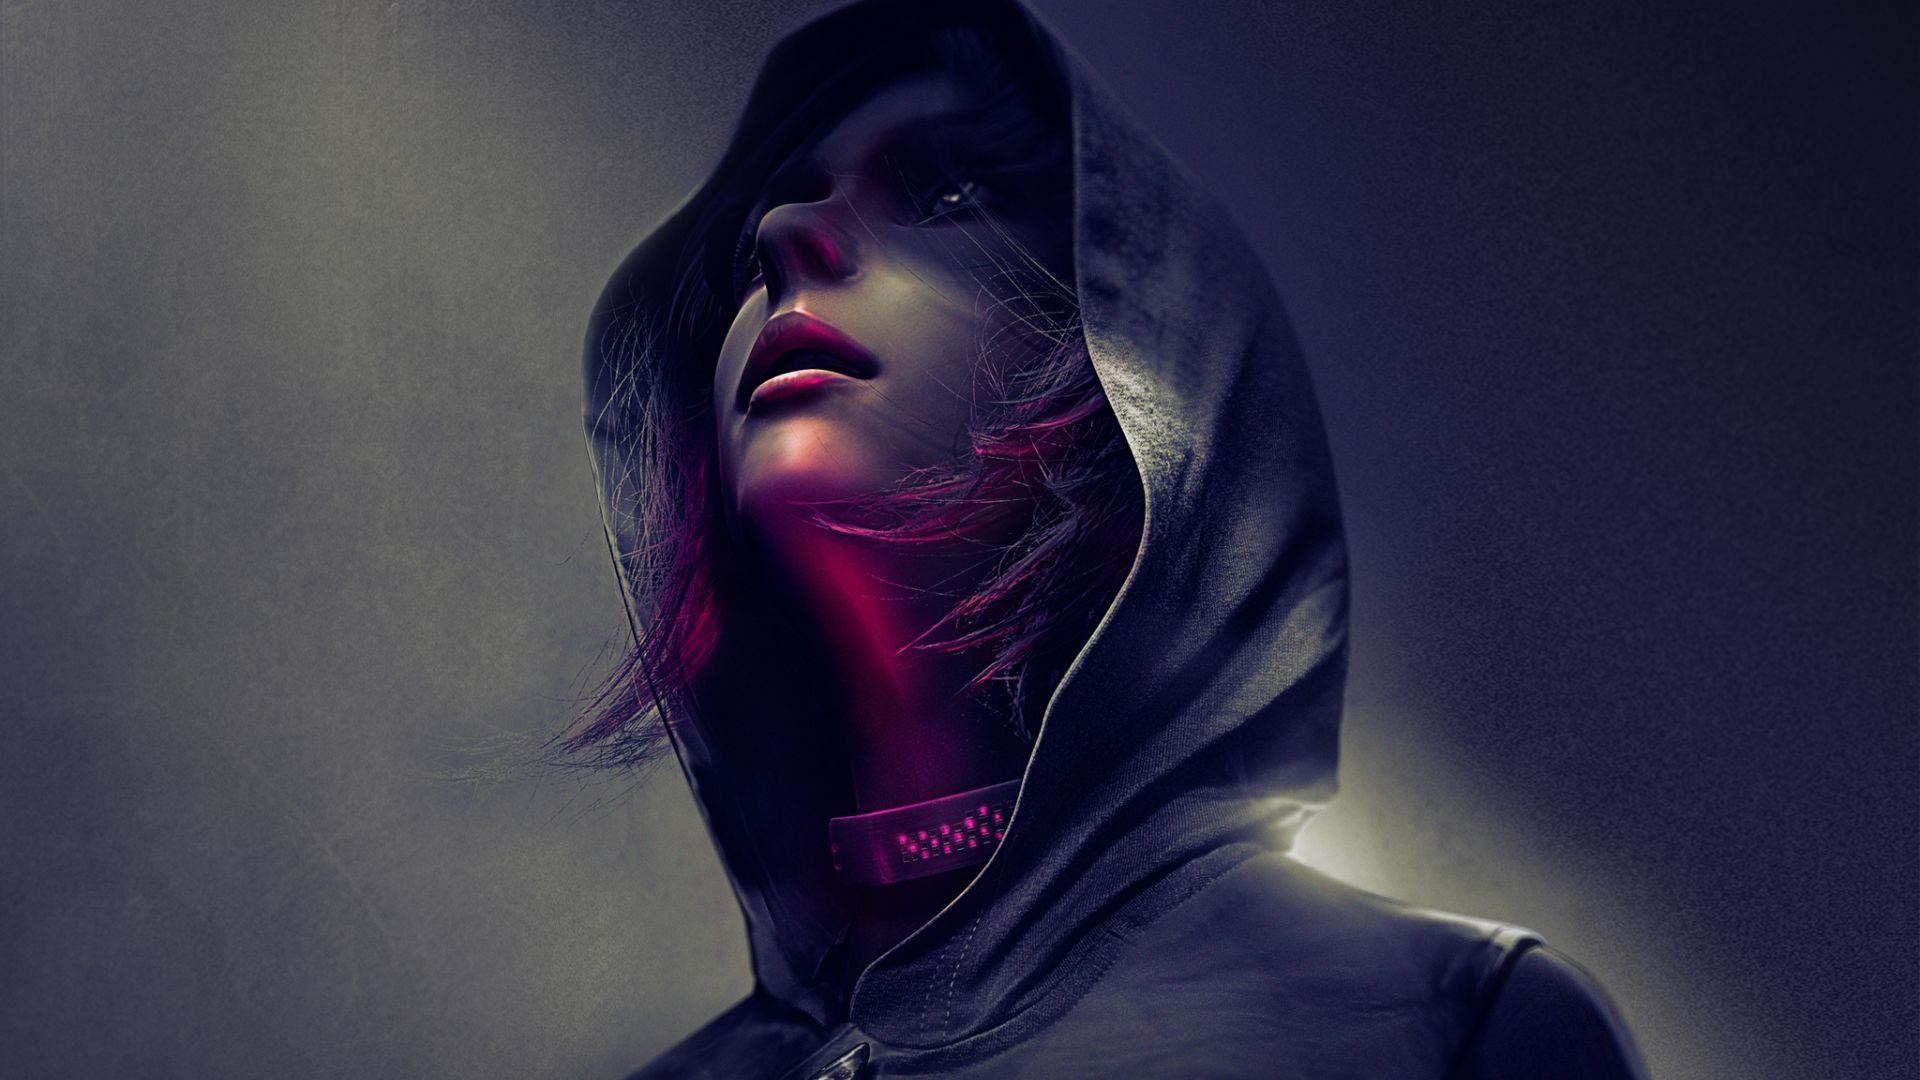 republique, girl, art 1080P Laptop Full HD Wallpaper, HD Games 4K Wallpaper, Image, Photo and Background